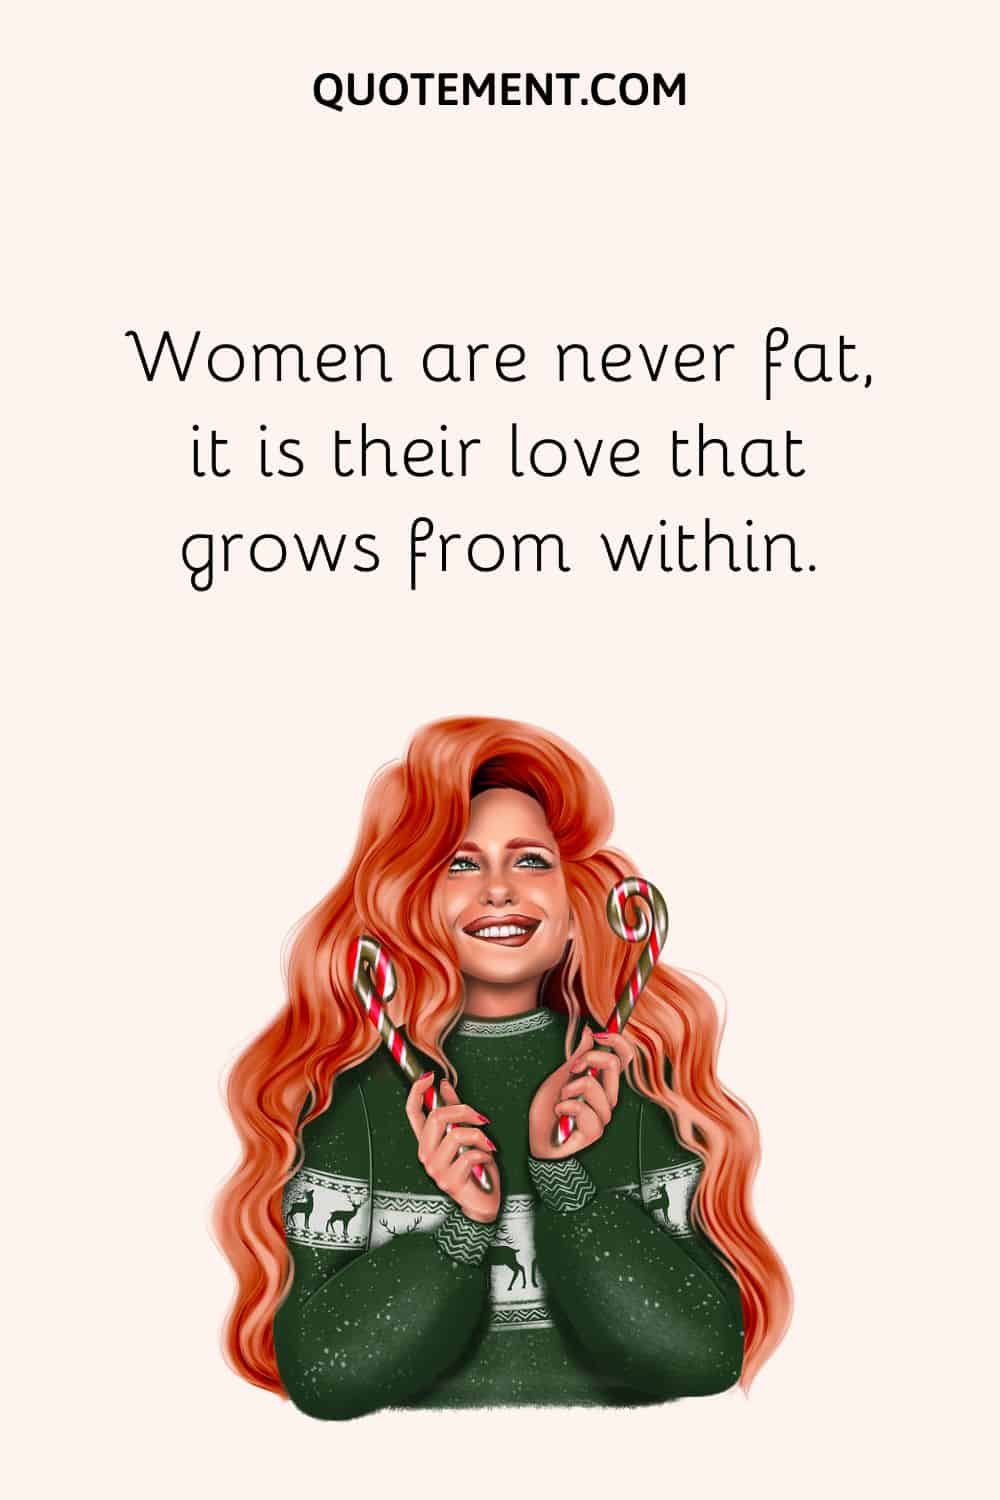 Women are never fat